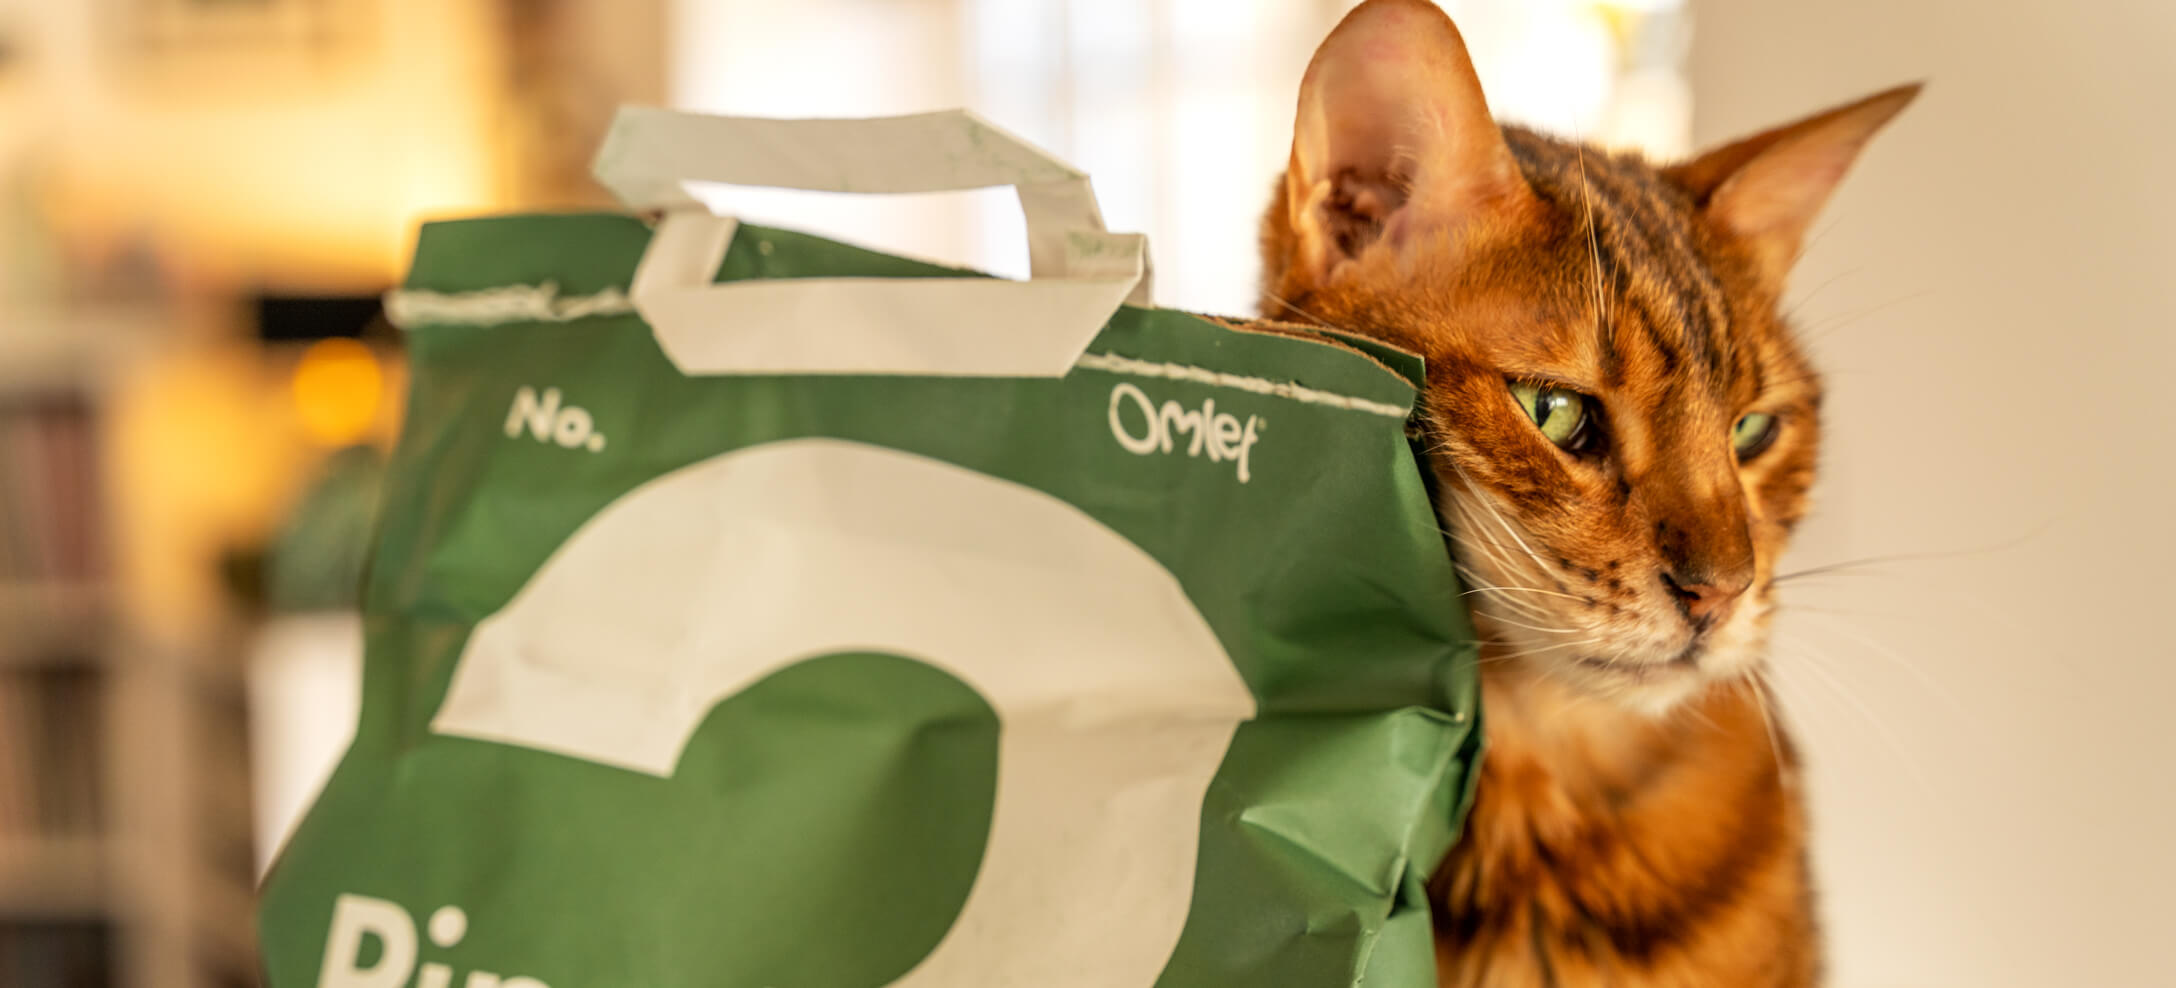 A Bengal cat sits by a green bag of cat litter